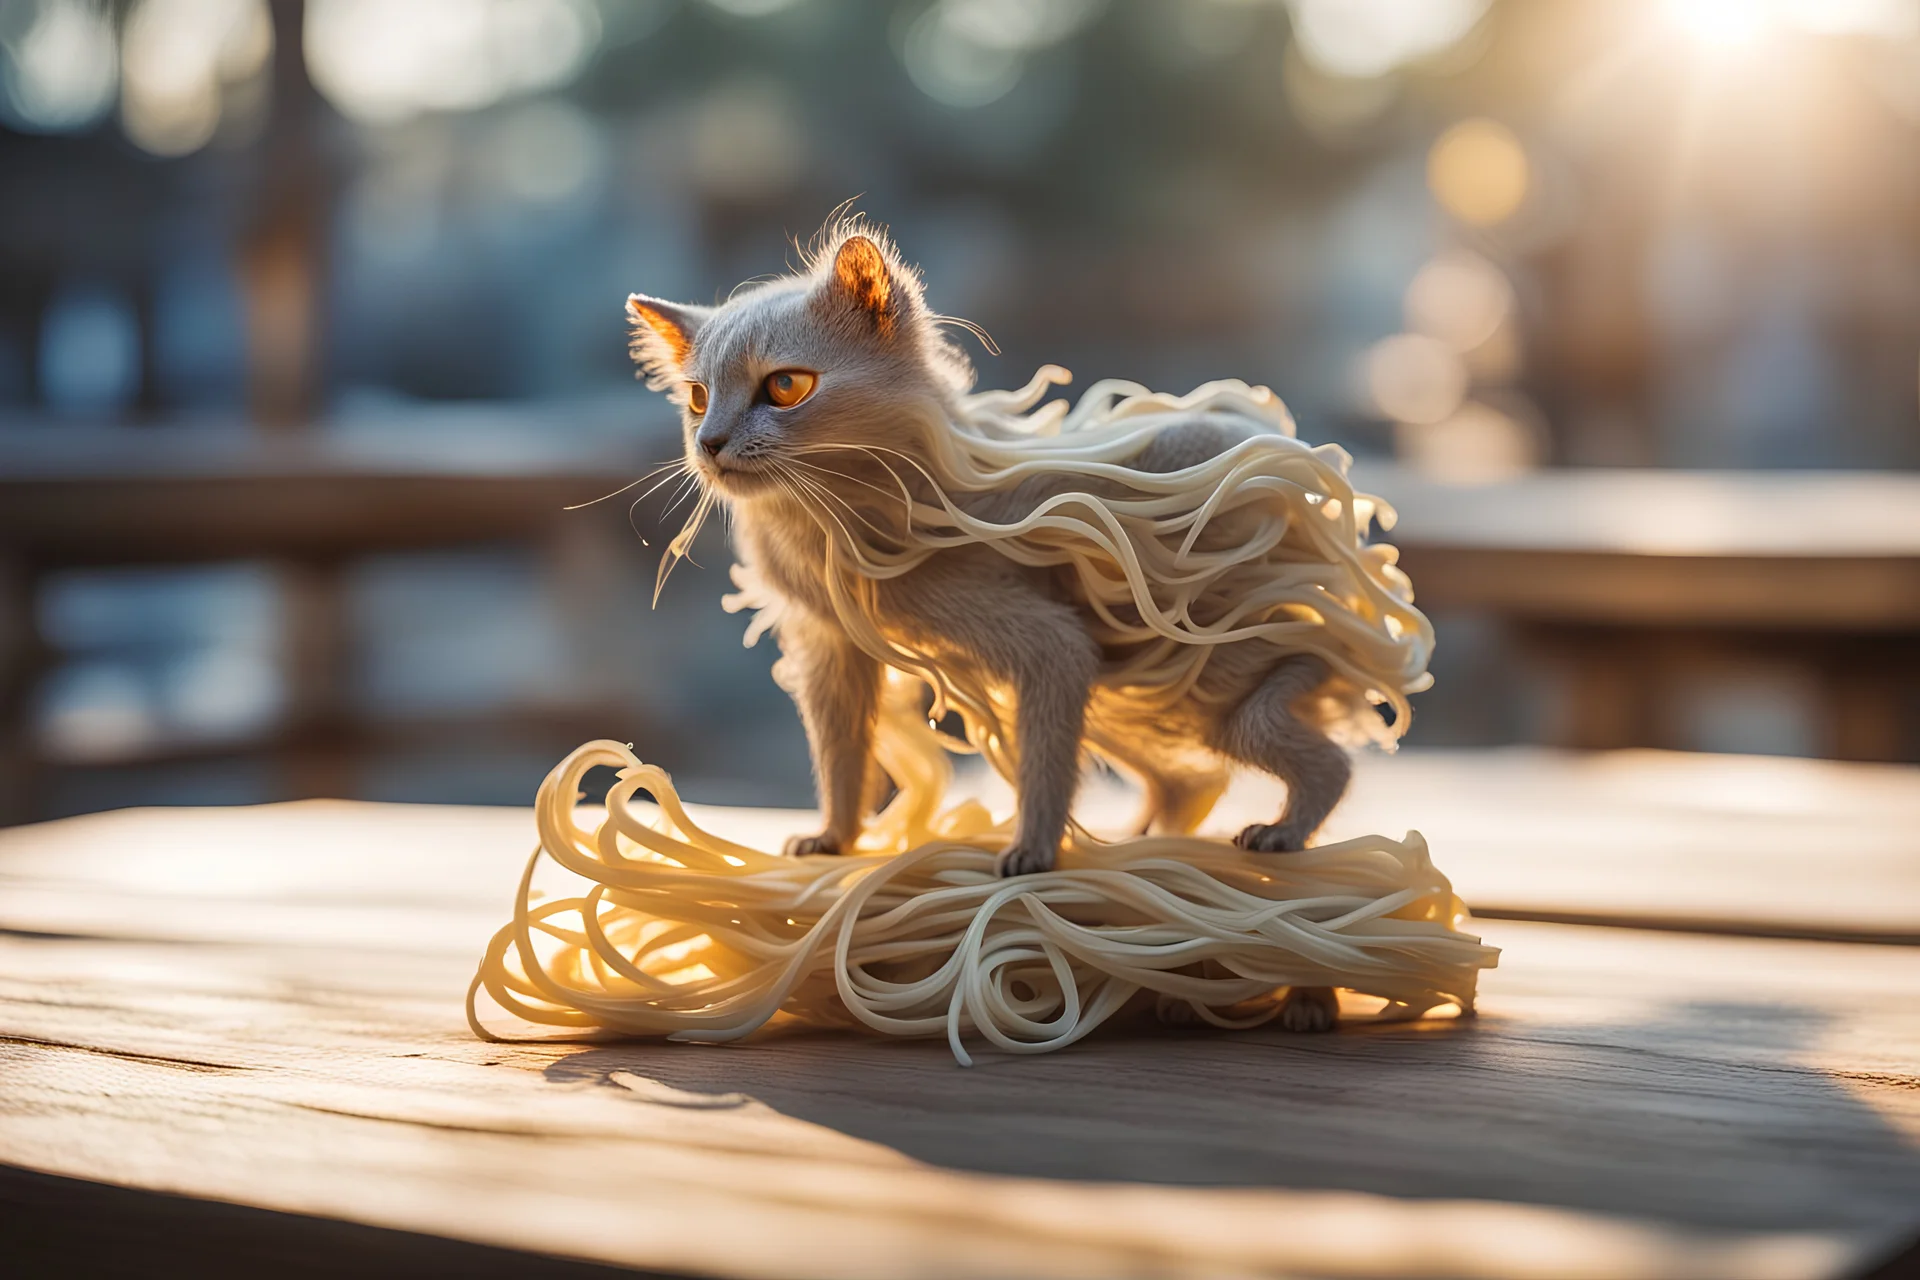 Double exposure, merged layers, Little sculpture of an italian pasta creature made with concrete and driftwood and mother-of-pearl and low voltage filament lit, golden patina, in sunshine, corrosion, heart and love, A beautiful little manul catches the pasta while standing on a wooden table in sunshine, ethereal, cinematic postprocessing, bokeh, dof